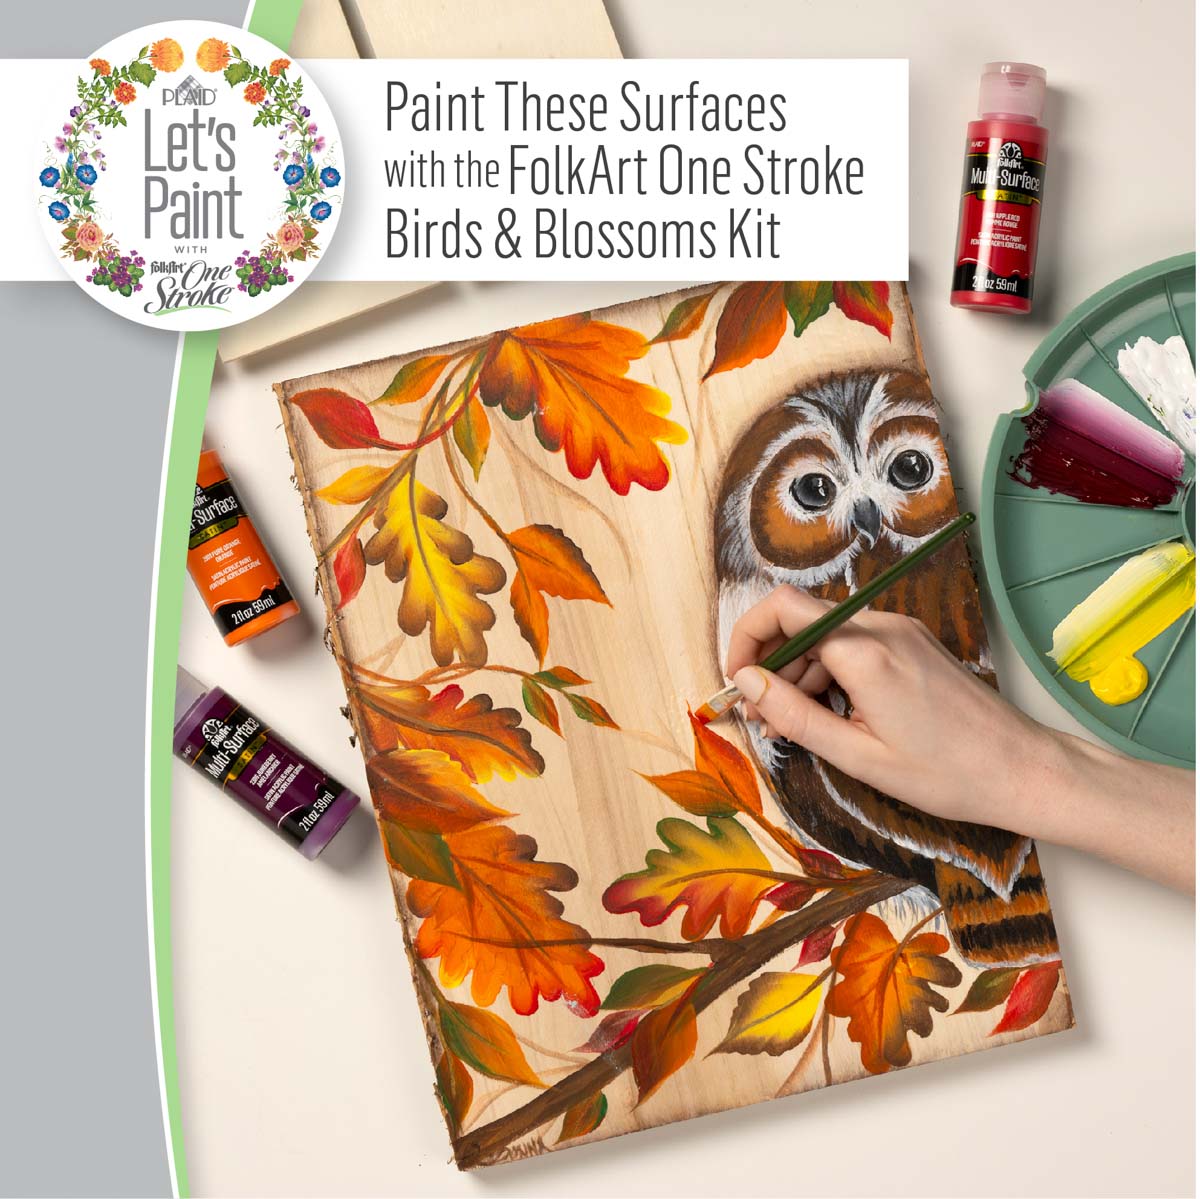 Let's Paint with FolkArt ® One Stroke™ Kit - Birds and Blossoms Surfaces - 90285